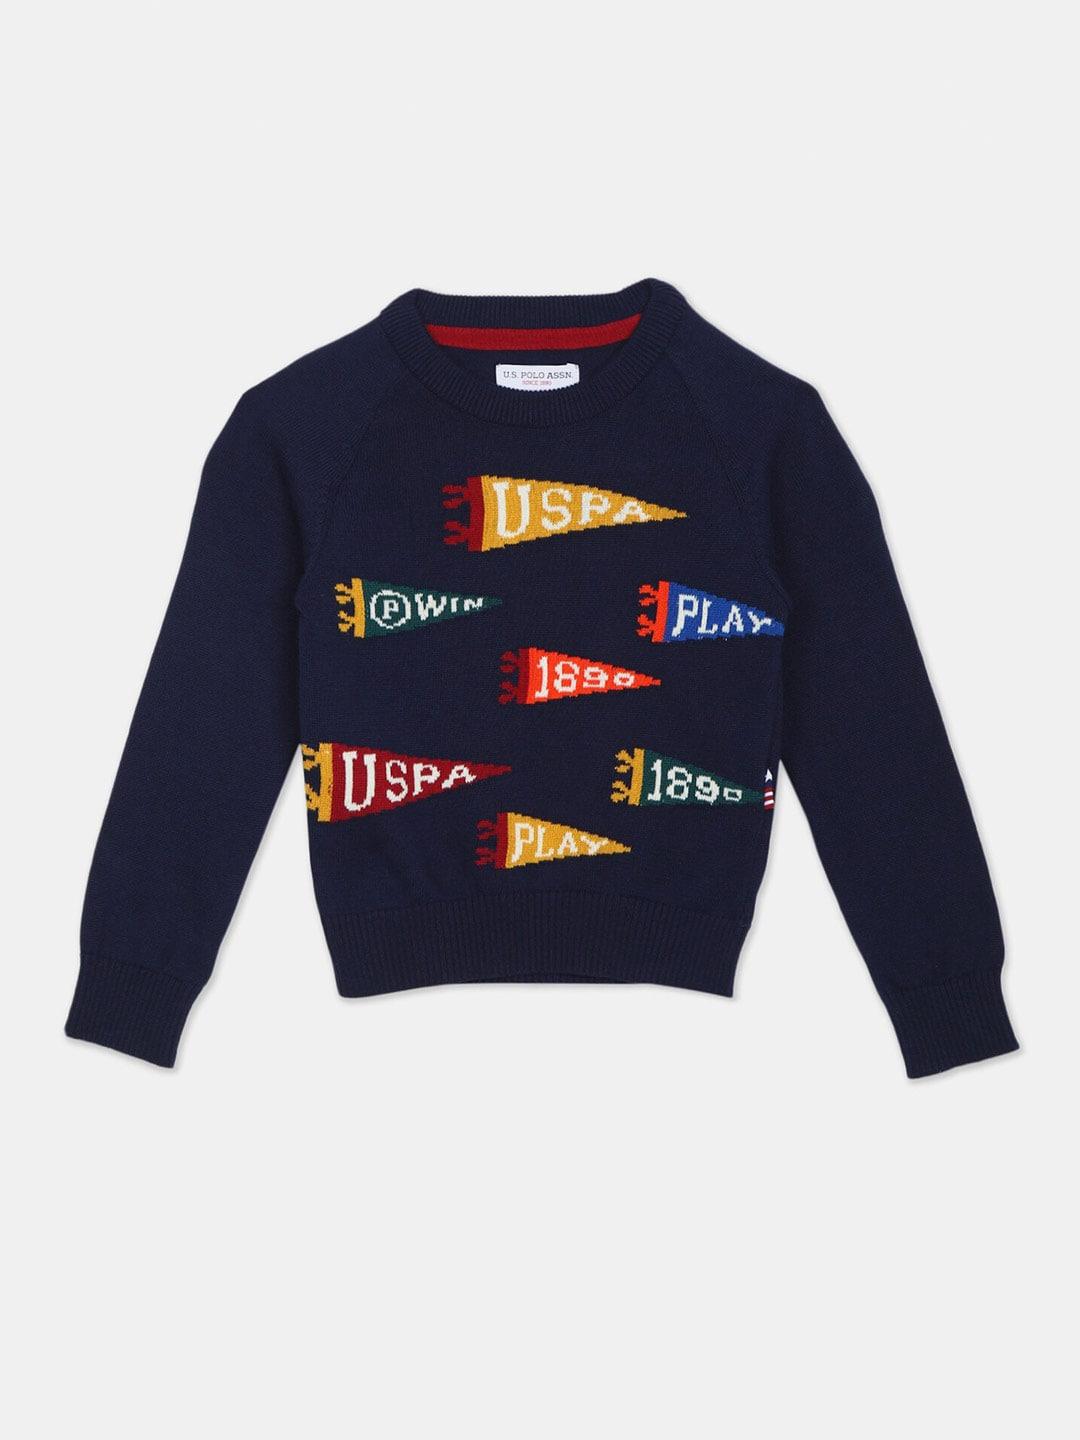 u-s-polo-assn-boys-navy-blue-&-red-cotton-printed-sweater